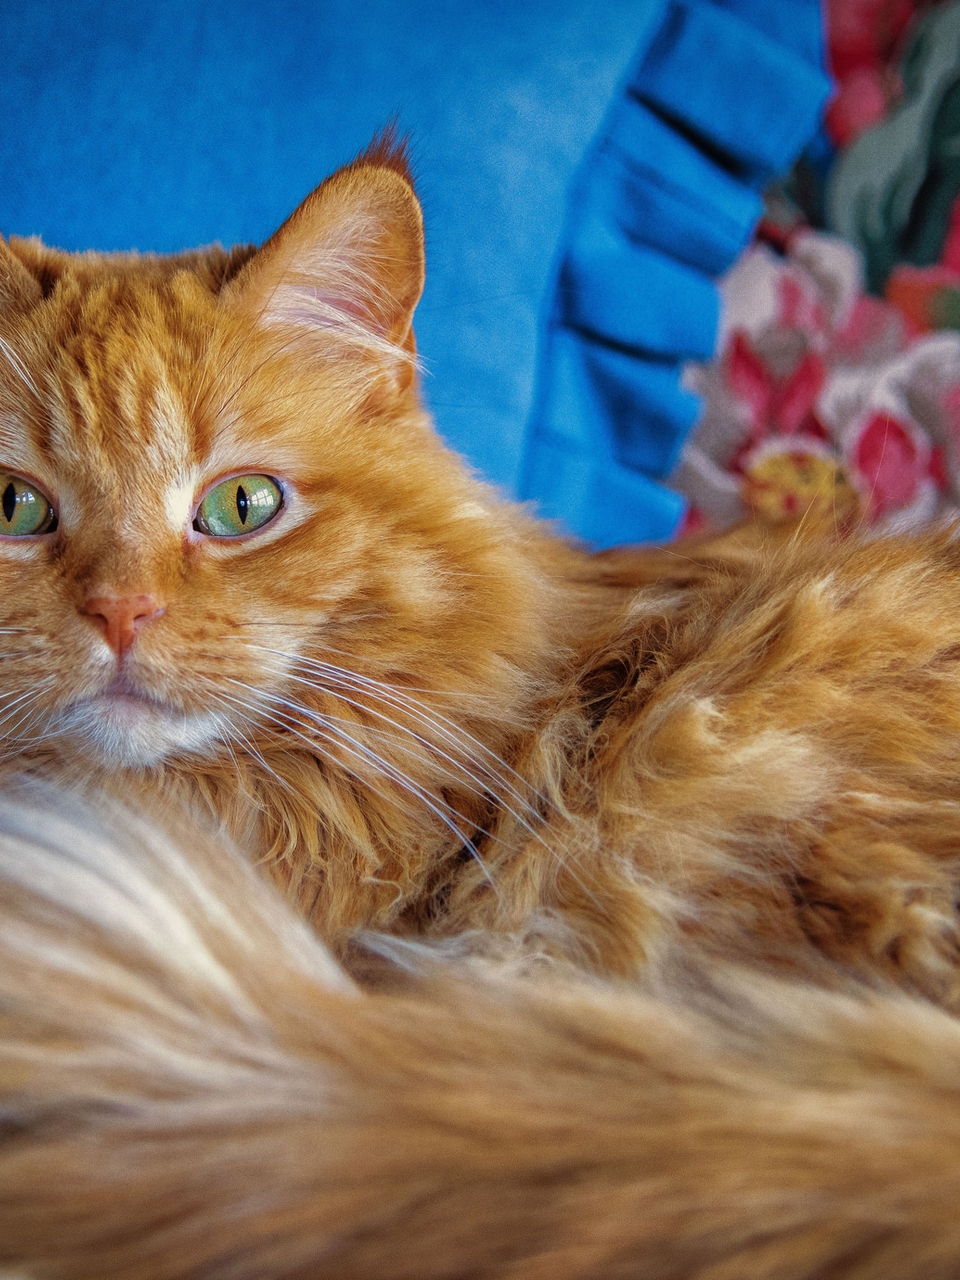 Image: Red, fluffy, cat, eyes, green, face